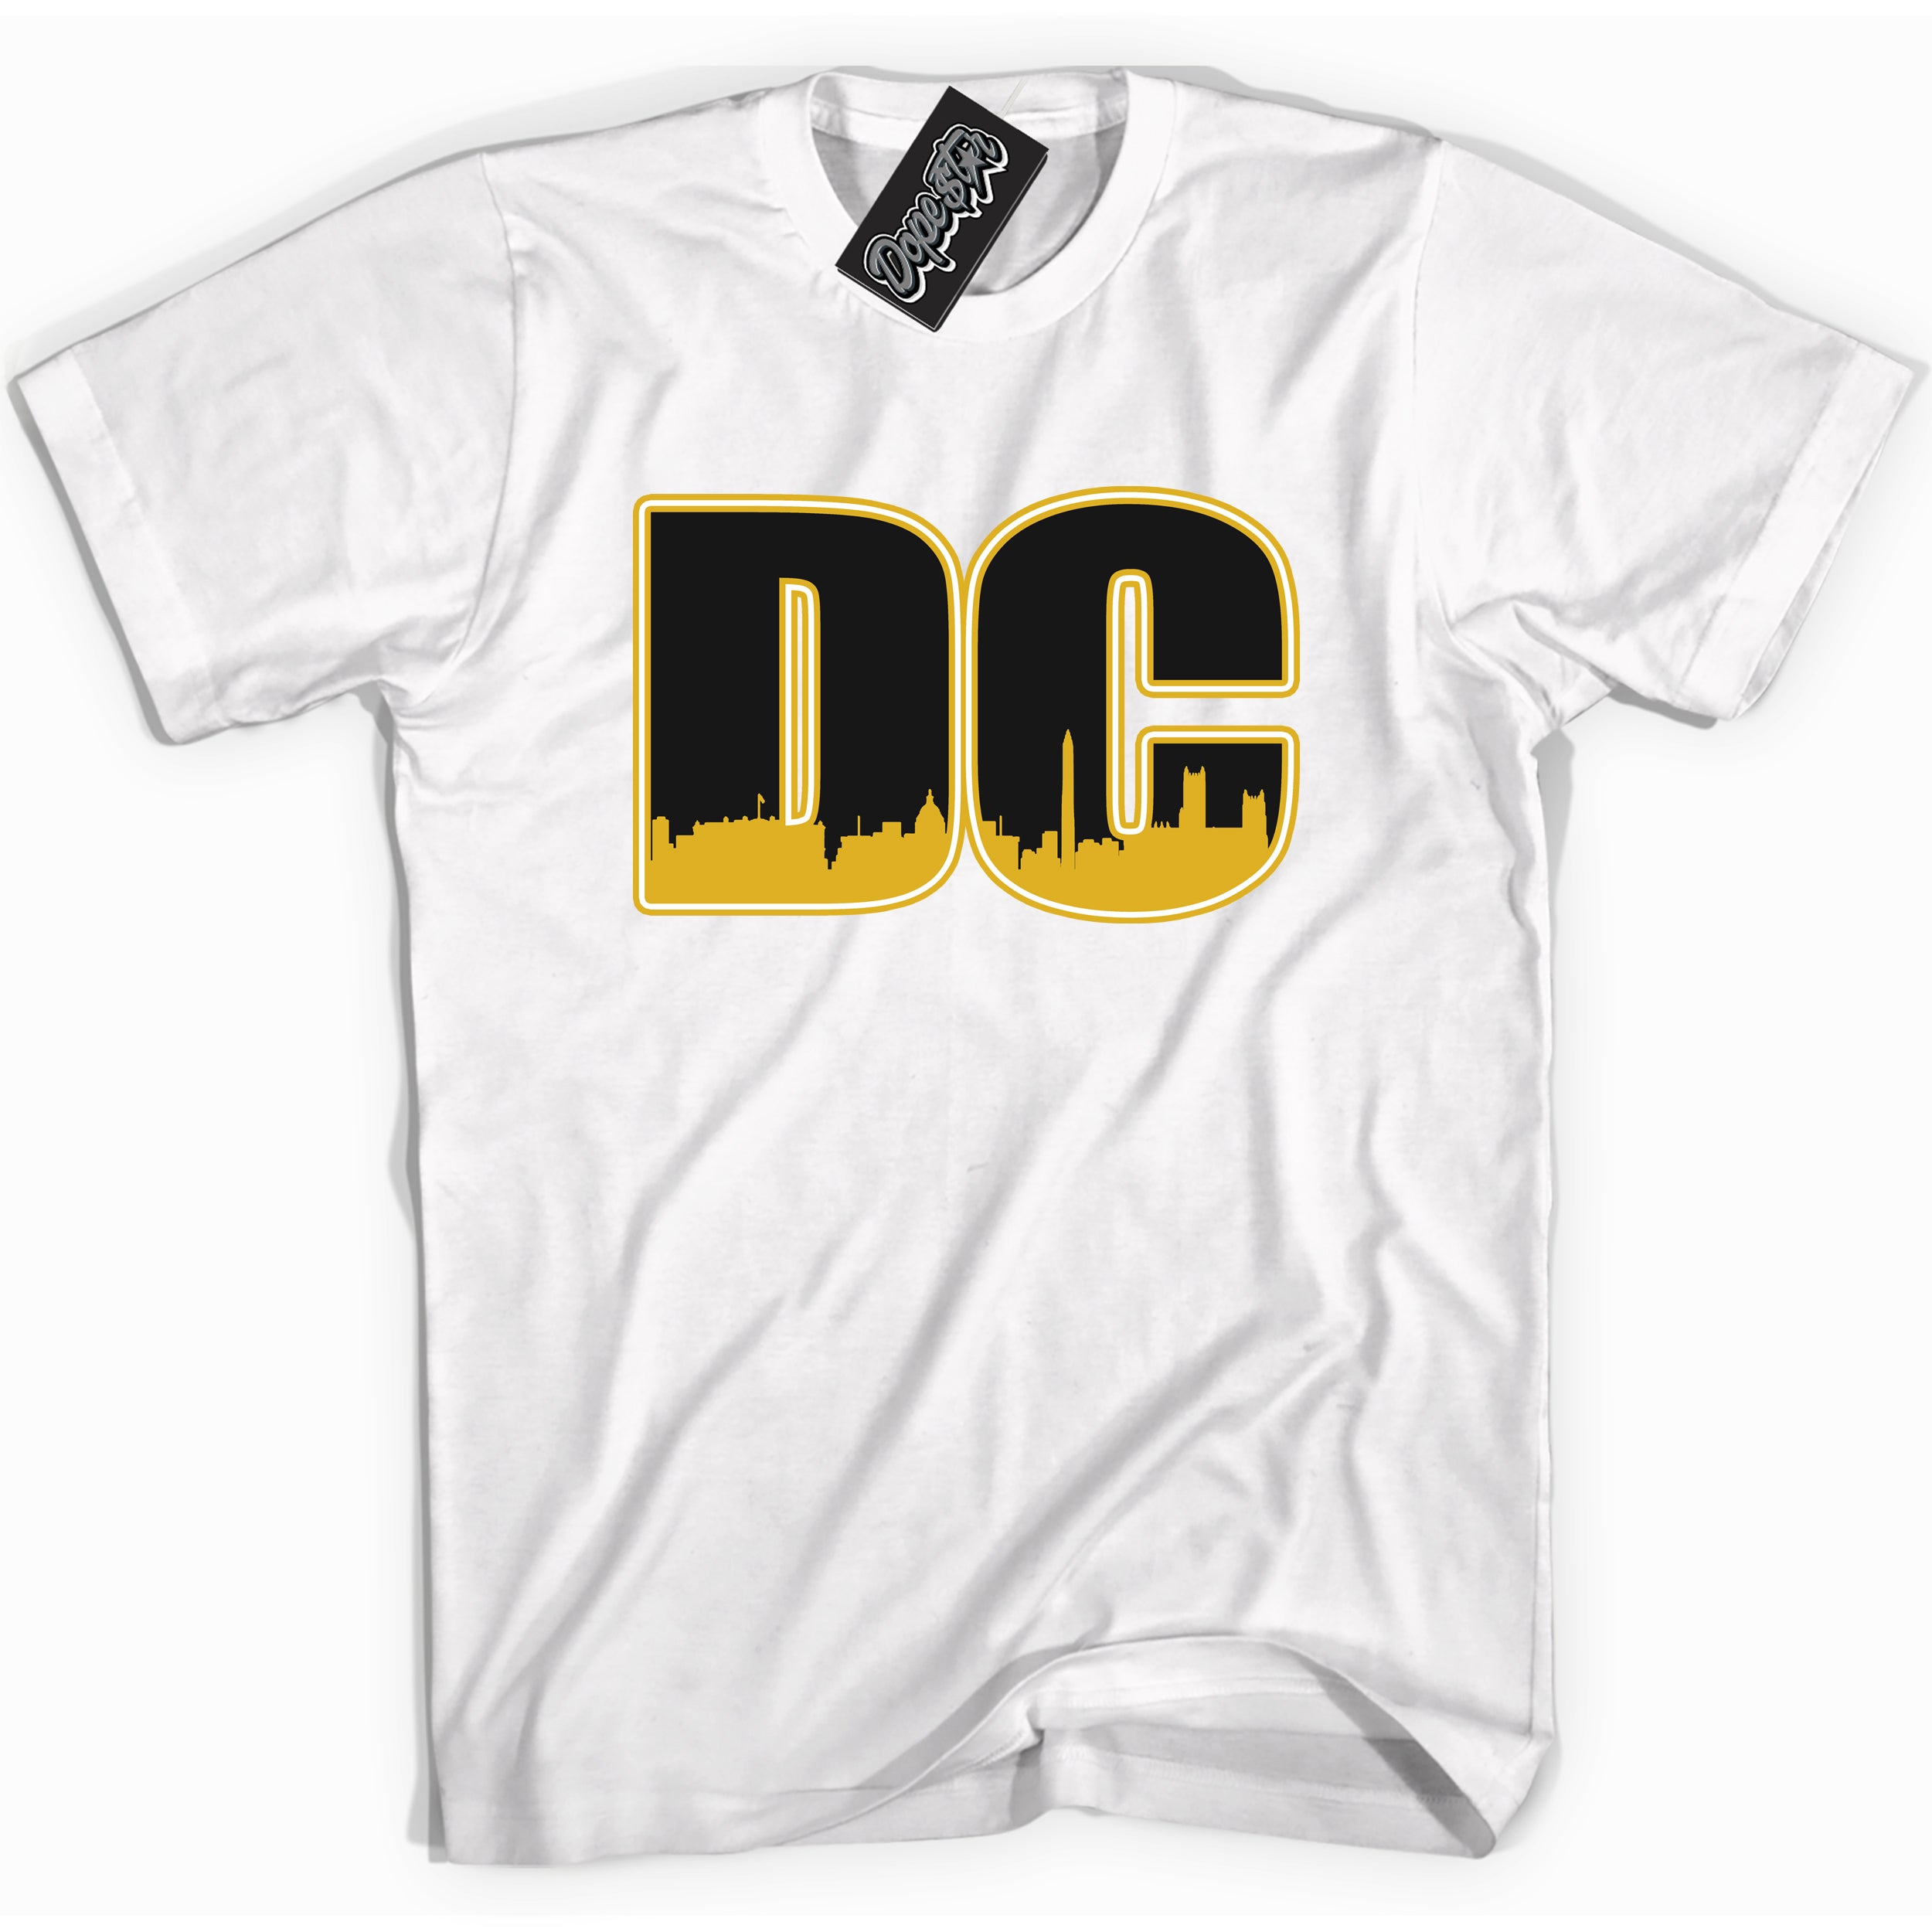 Cool White Shirt with “ DC” design that perfectly matches Yellow Ochre 6s Sneakers.